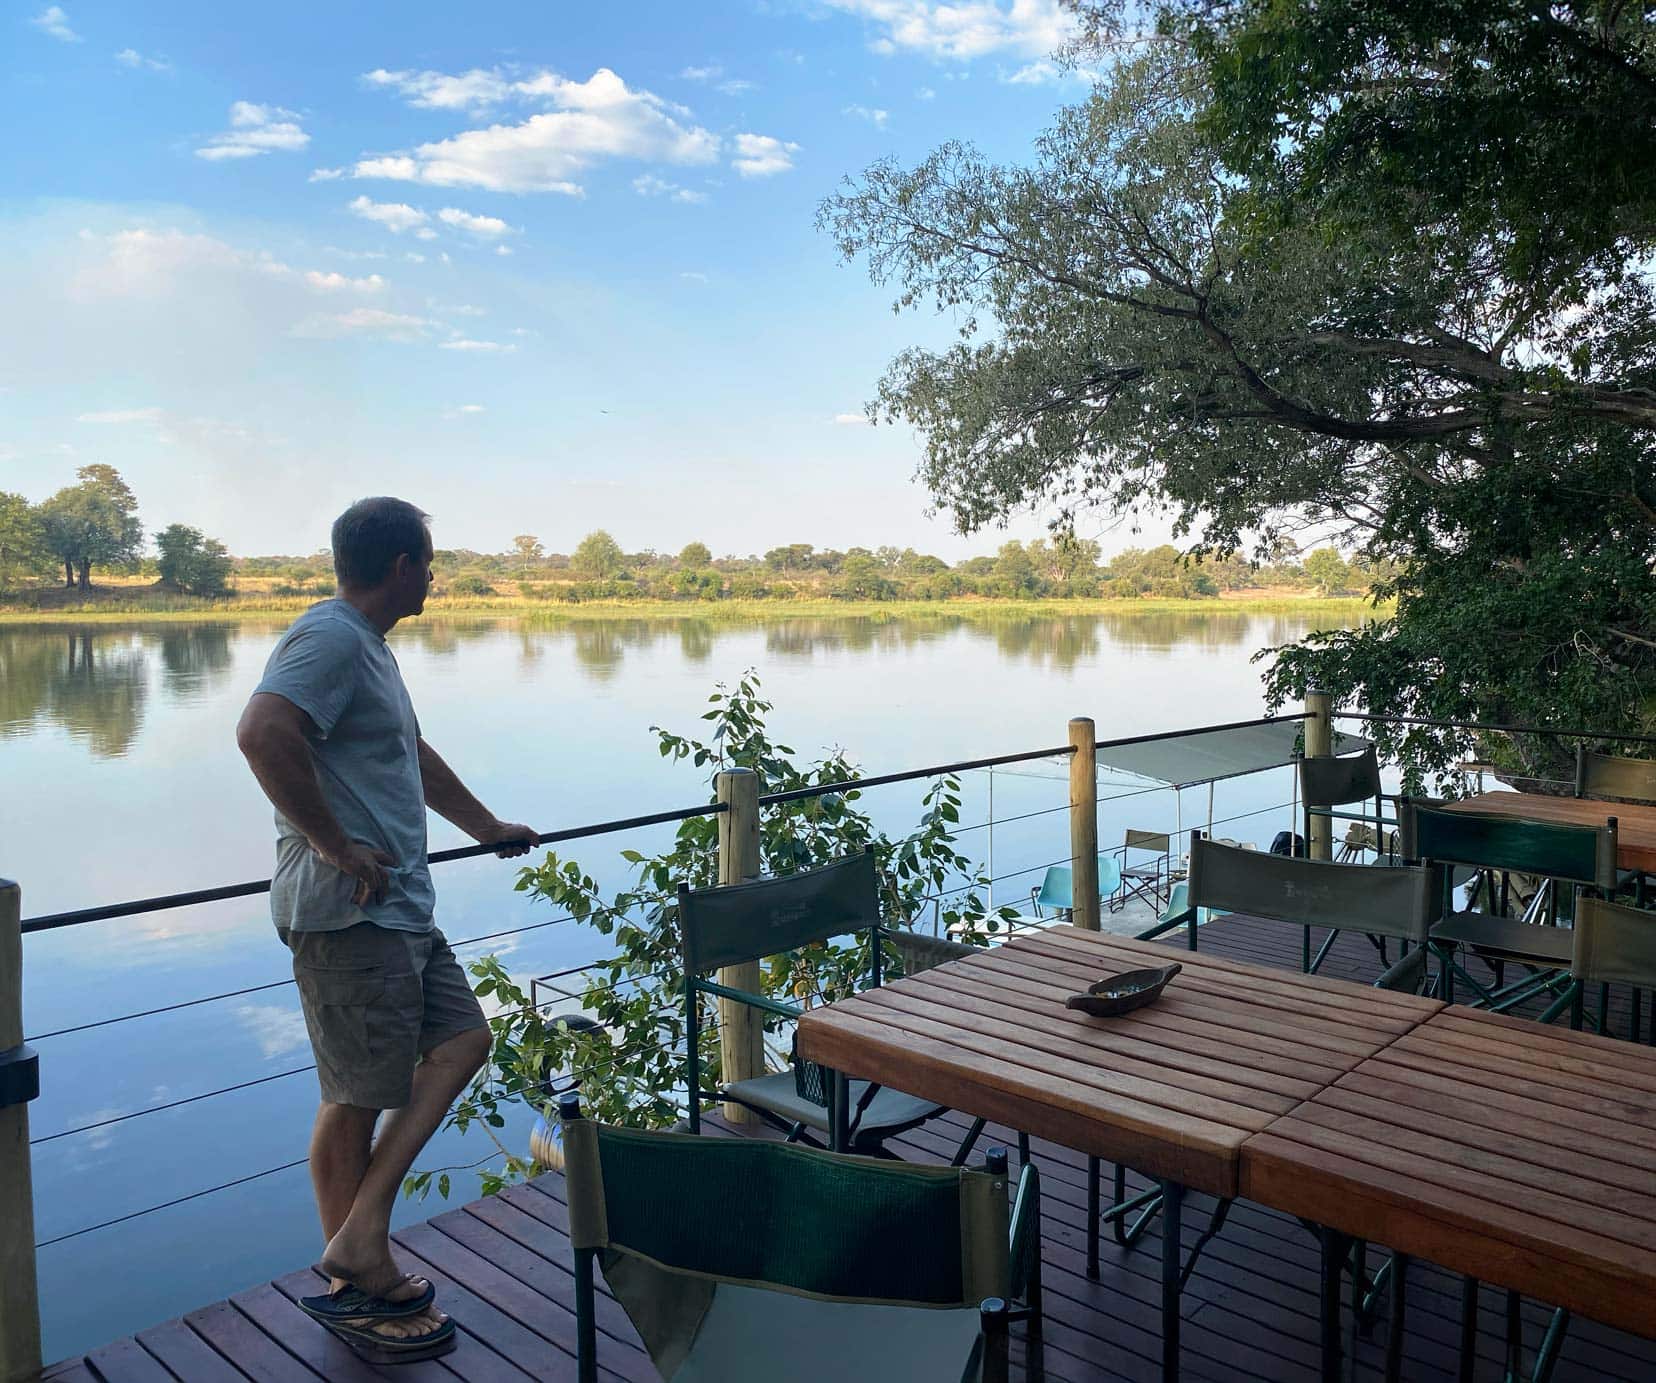 Lars looking out over the Kavango River towards the National Park on the opposite side of the river